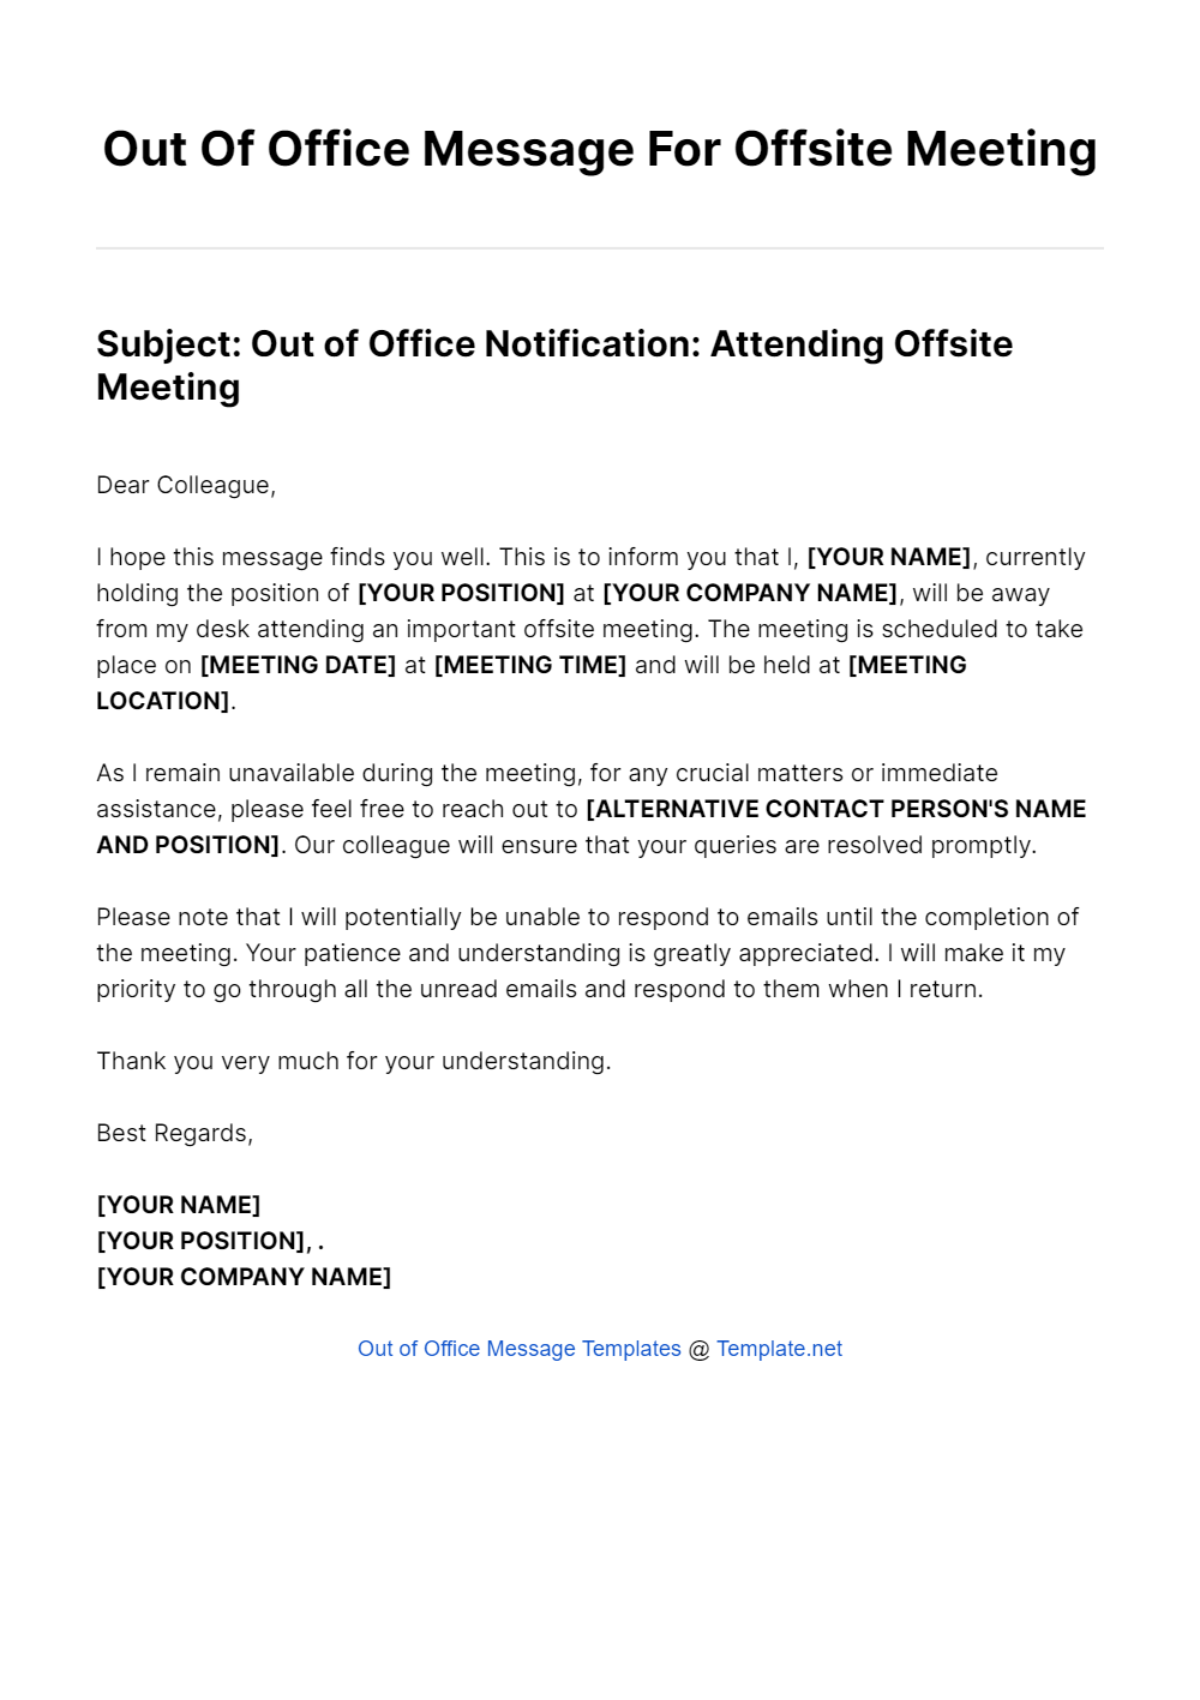 Out Of Office Message For Offsite Meeting Template